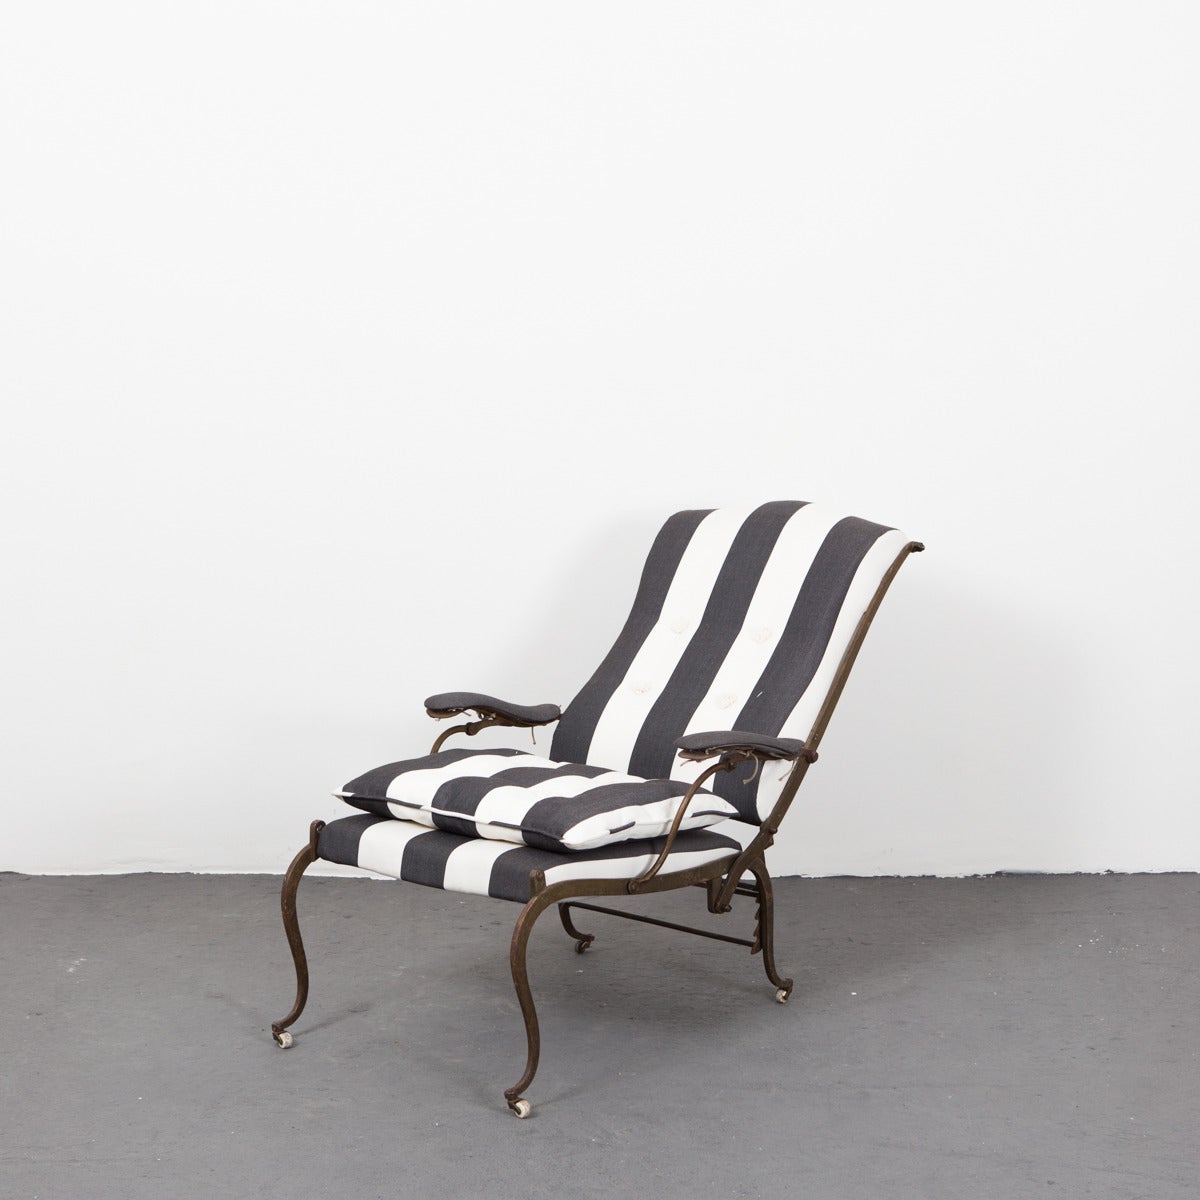 Chair made in Sweden during 19th Century in iron. Back adjustable in 4 modes. Upholstered in a black and white wide striped thick cotton canvas.